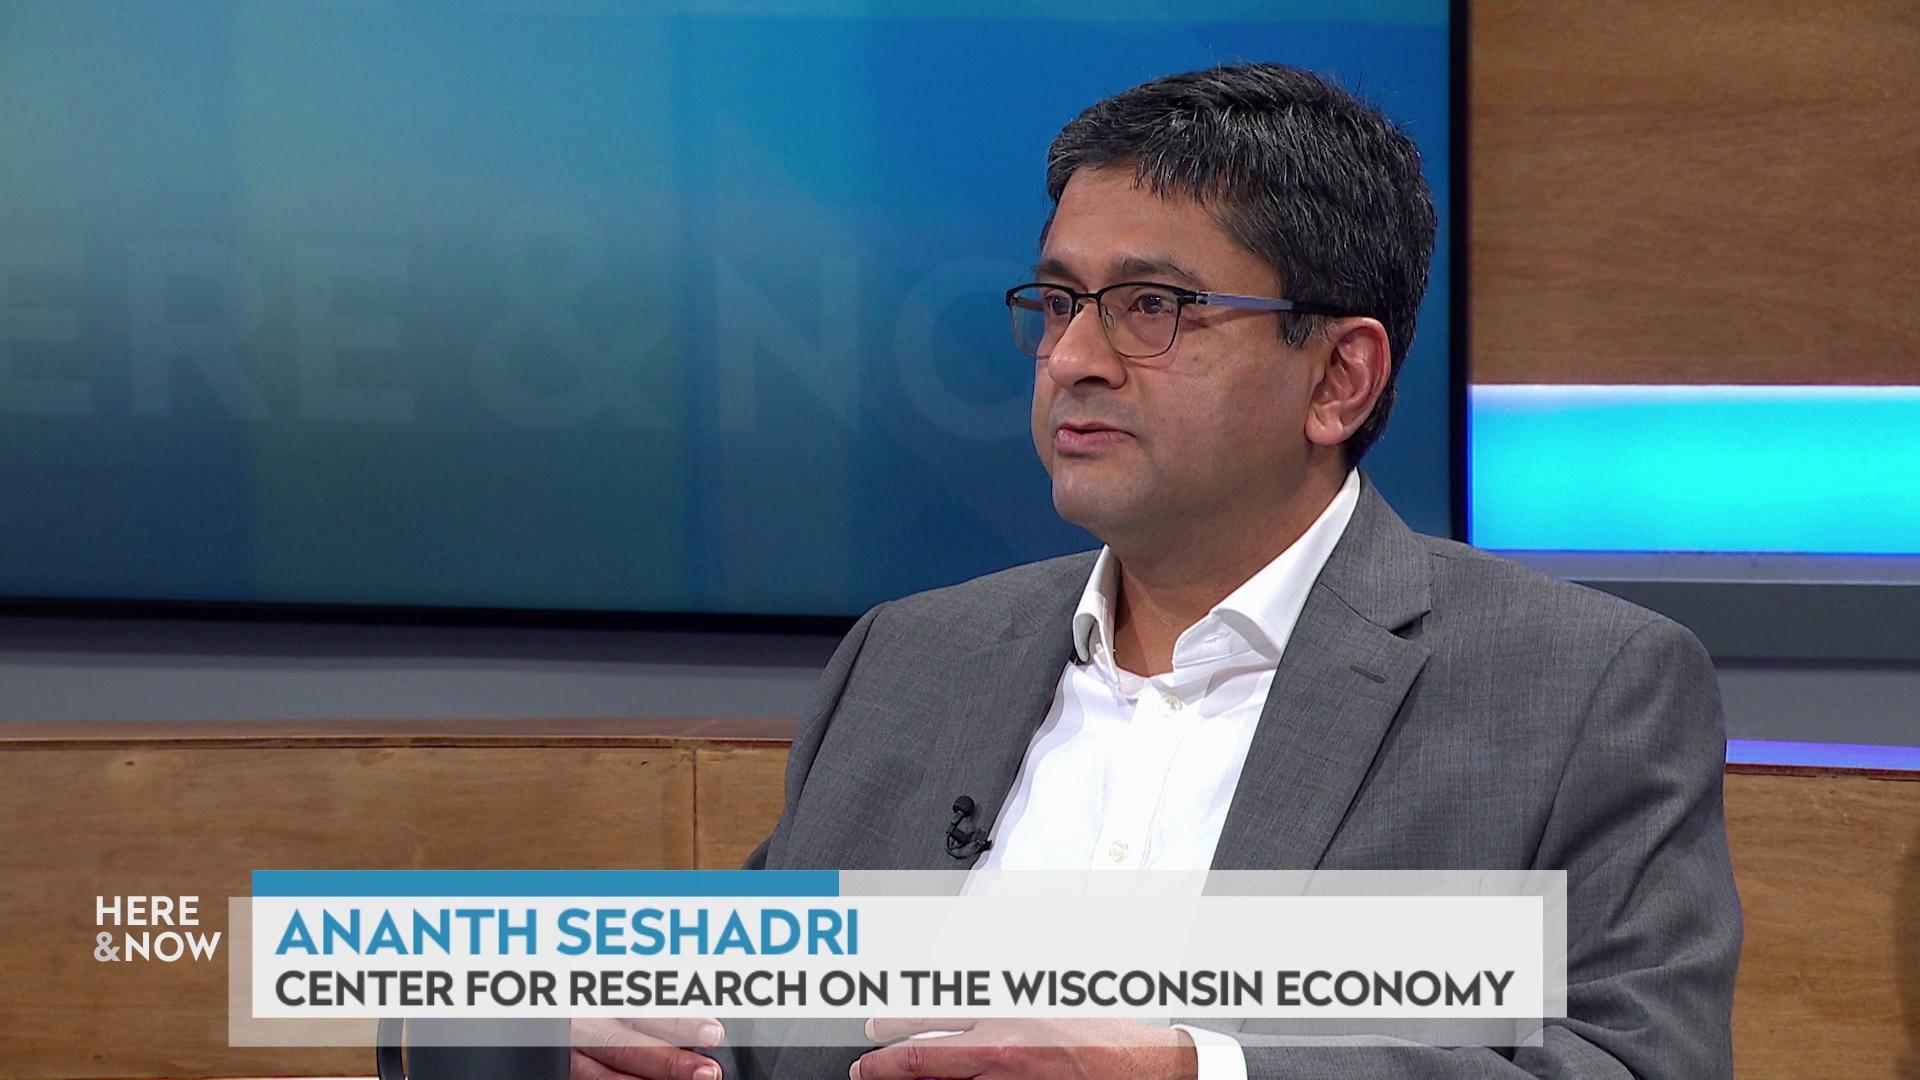 A still image shows Ananth Seshadri seated at the 'Here & Now' set featuring wood paneling, with a graphic at bottom reading 'Ananth Seshadri' and 'Center for Research on the Wisconsin Economy.'